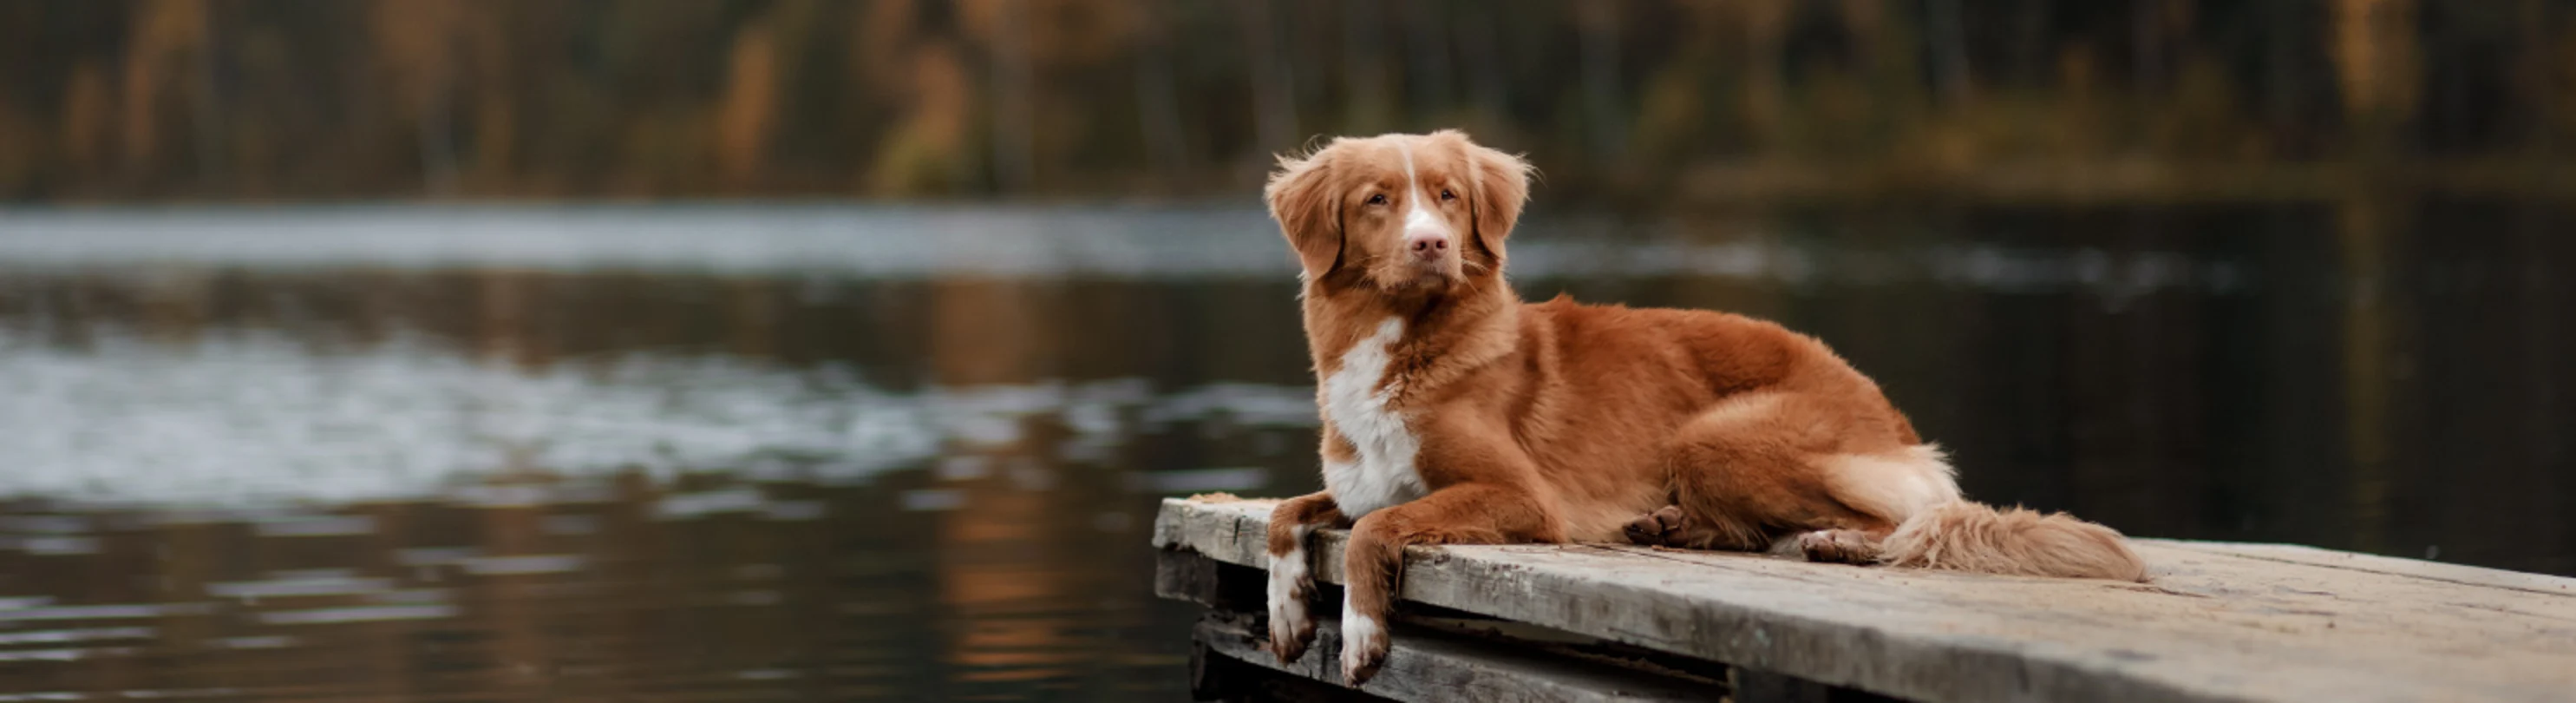 Dog on dock at lake with forest